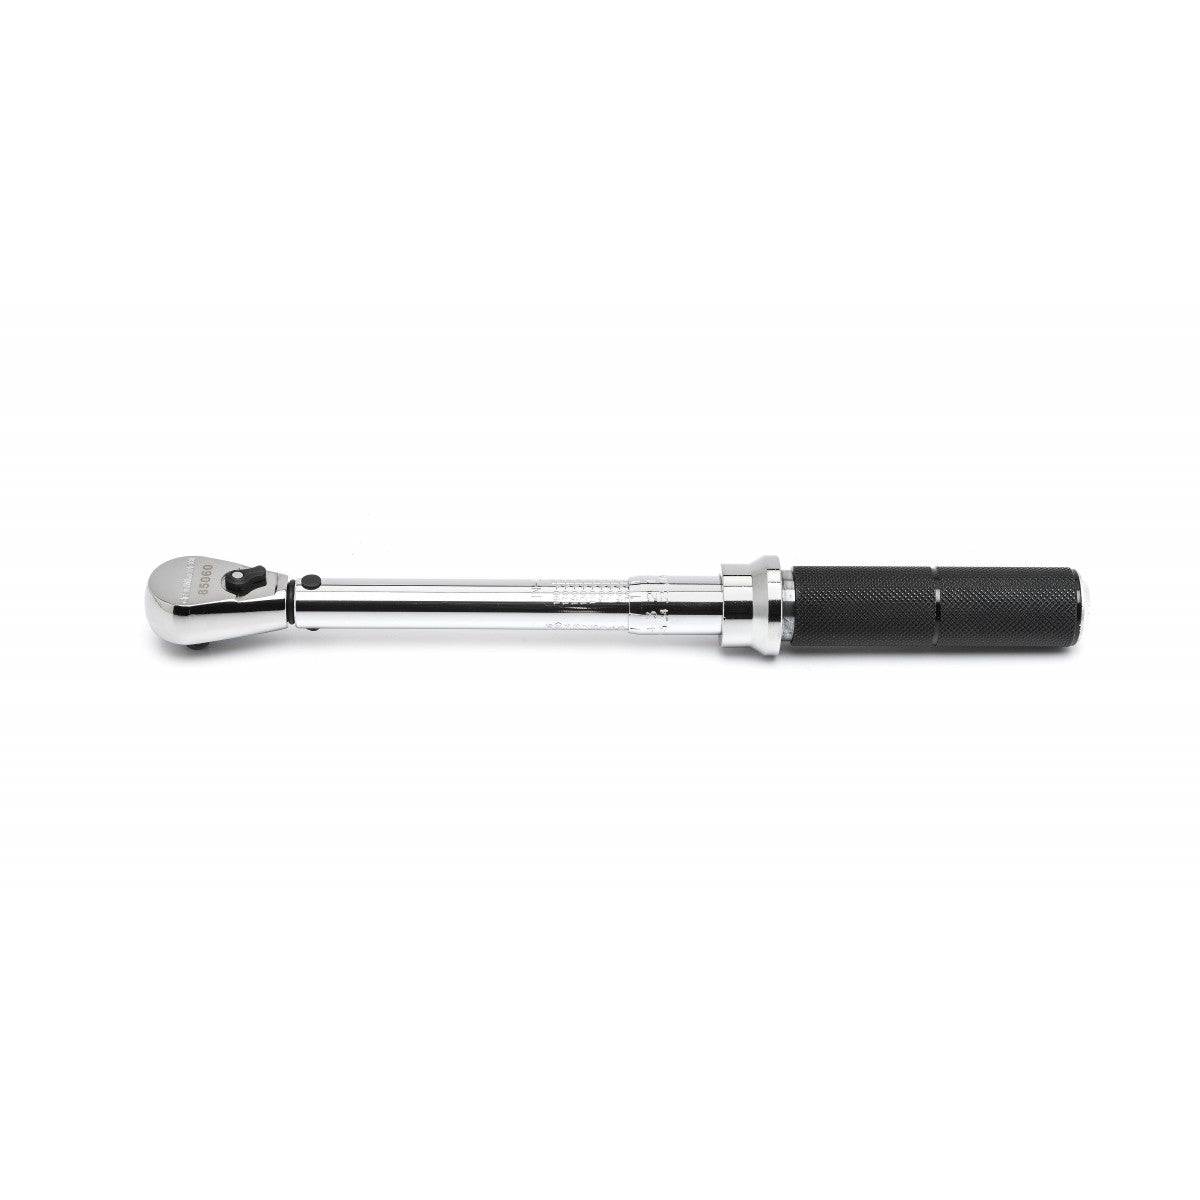 1/4" Drive Micrometer Torque Wrench 85060M by Gearwrench